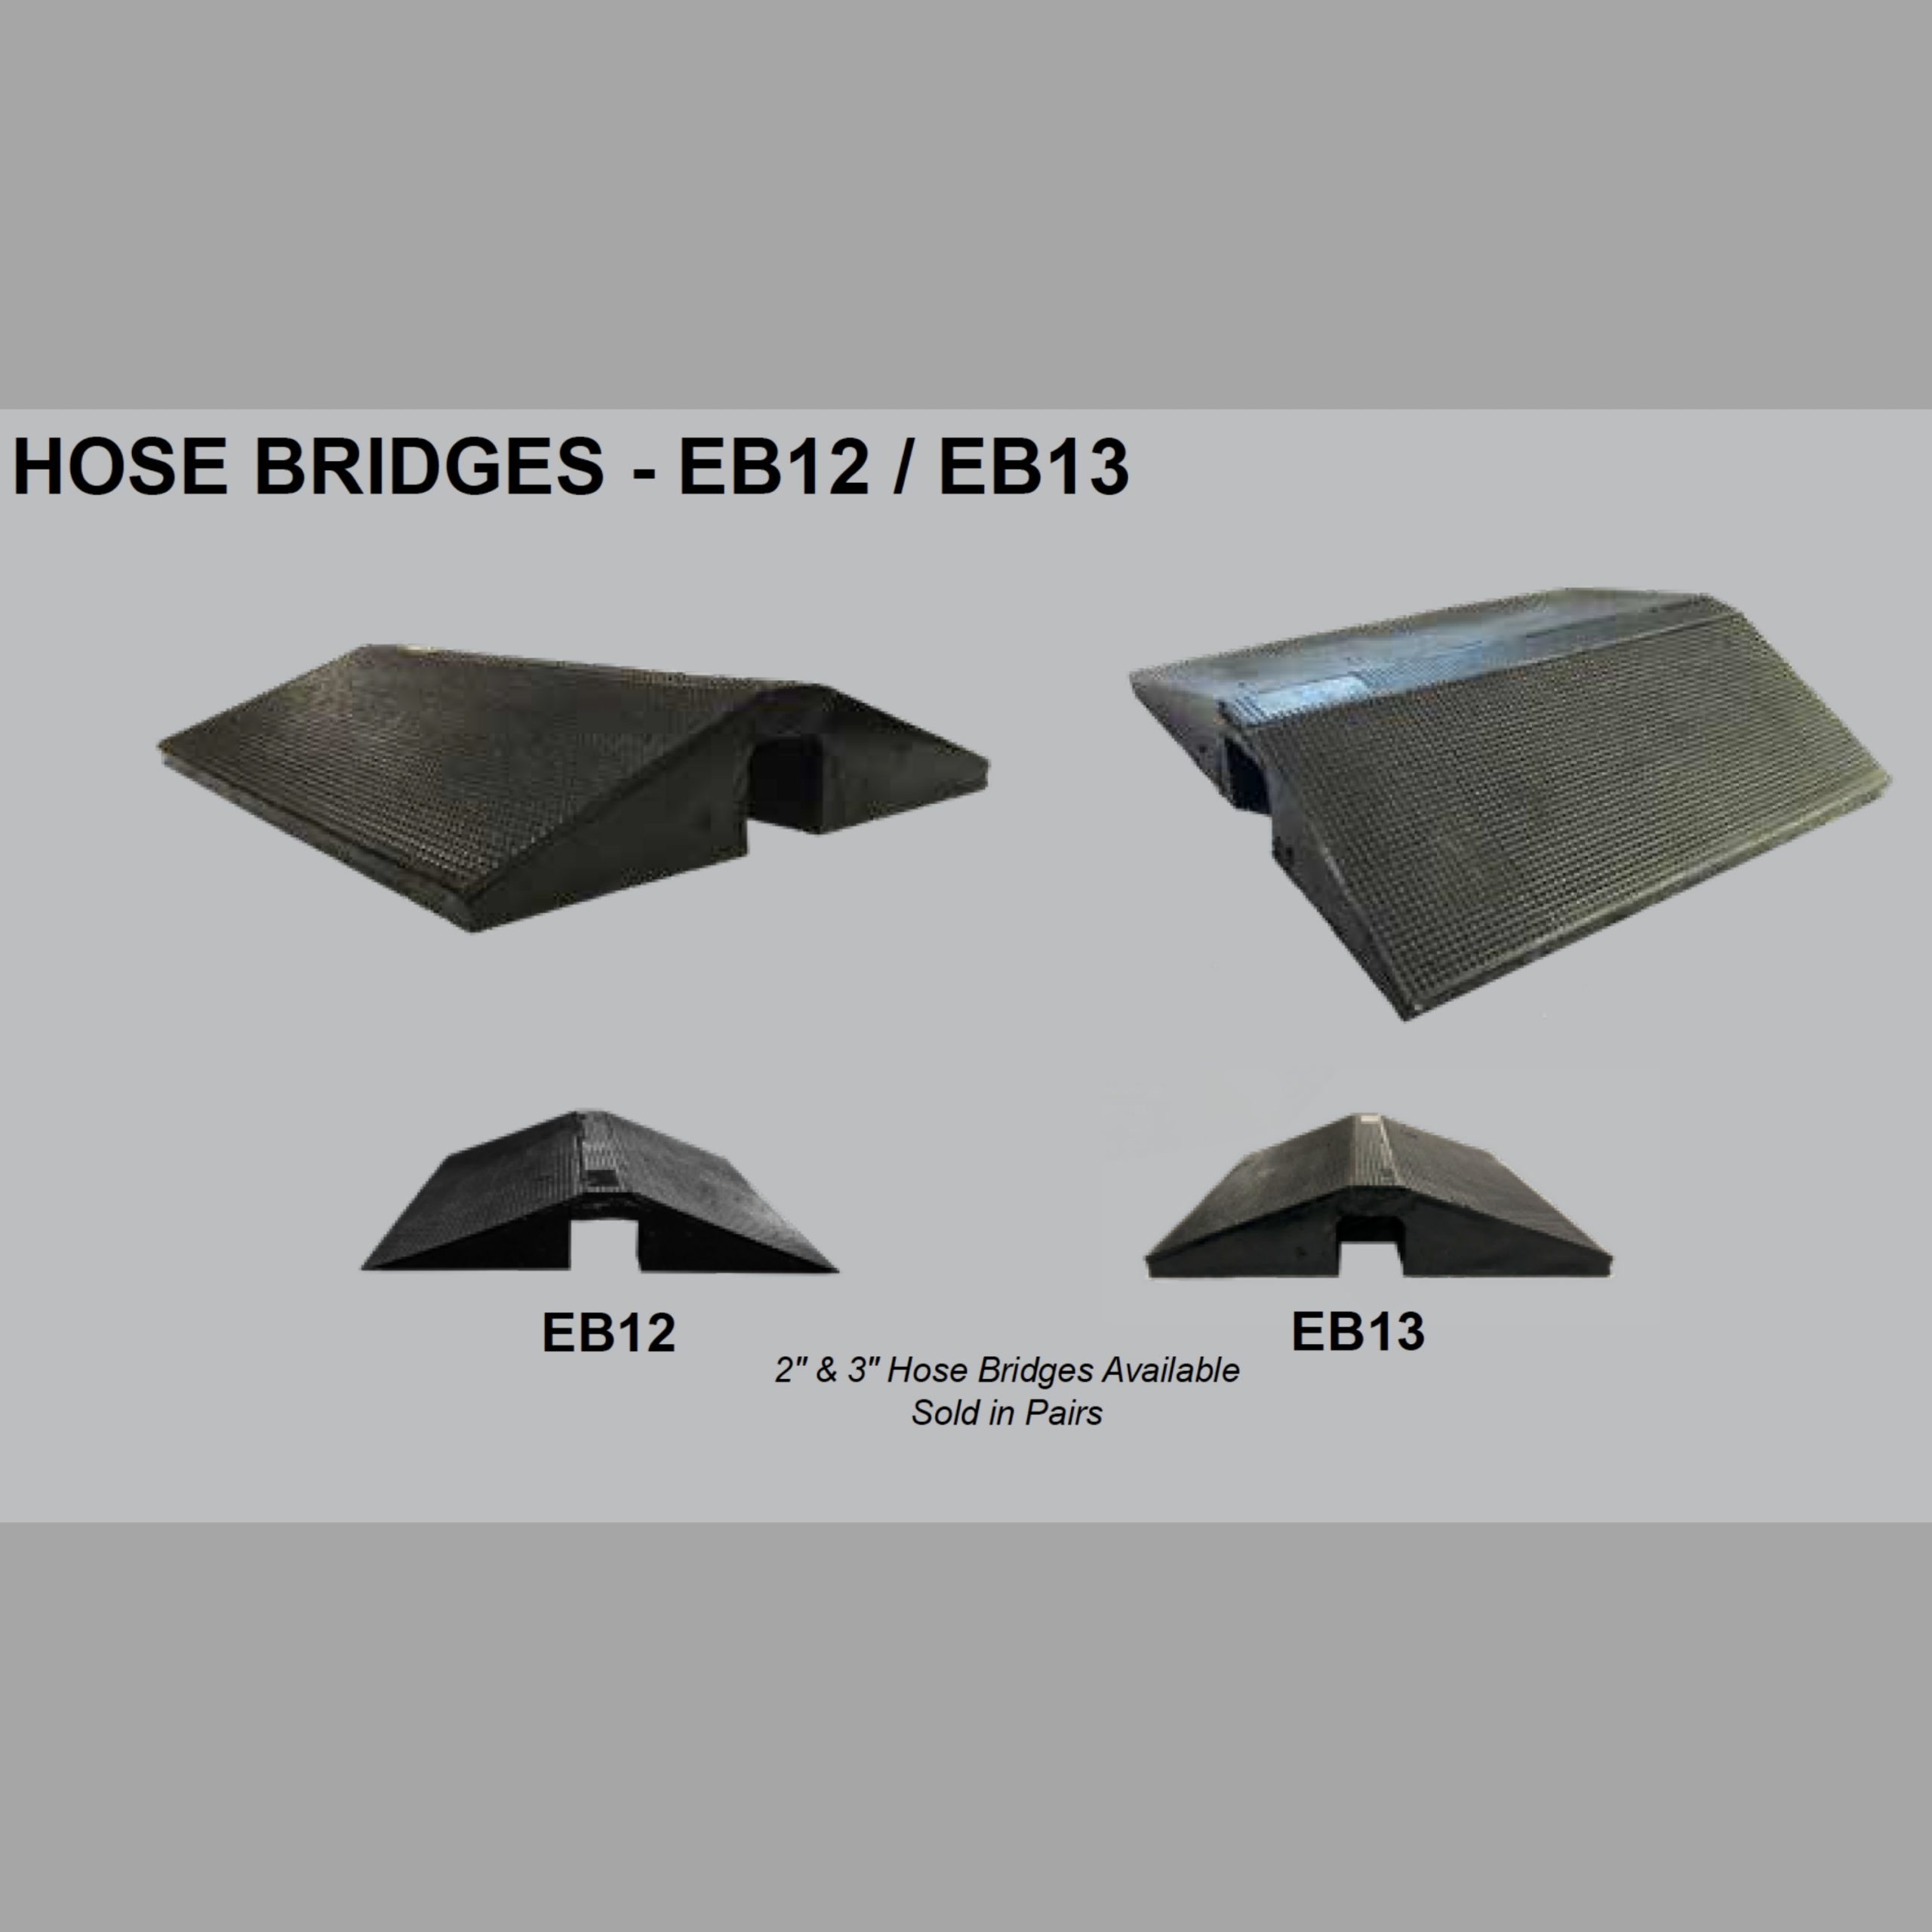 https://www.cableprotectorworks.com/wp-content/uploads/2021/04/Elasco-Products-Hose-Bridge-Cable-Cover-EB12-3-scaled.jpg